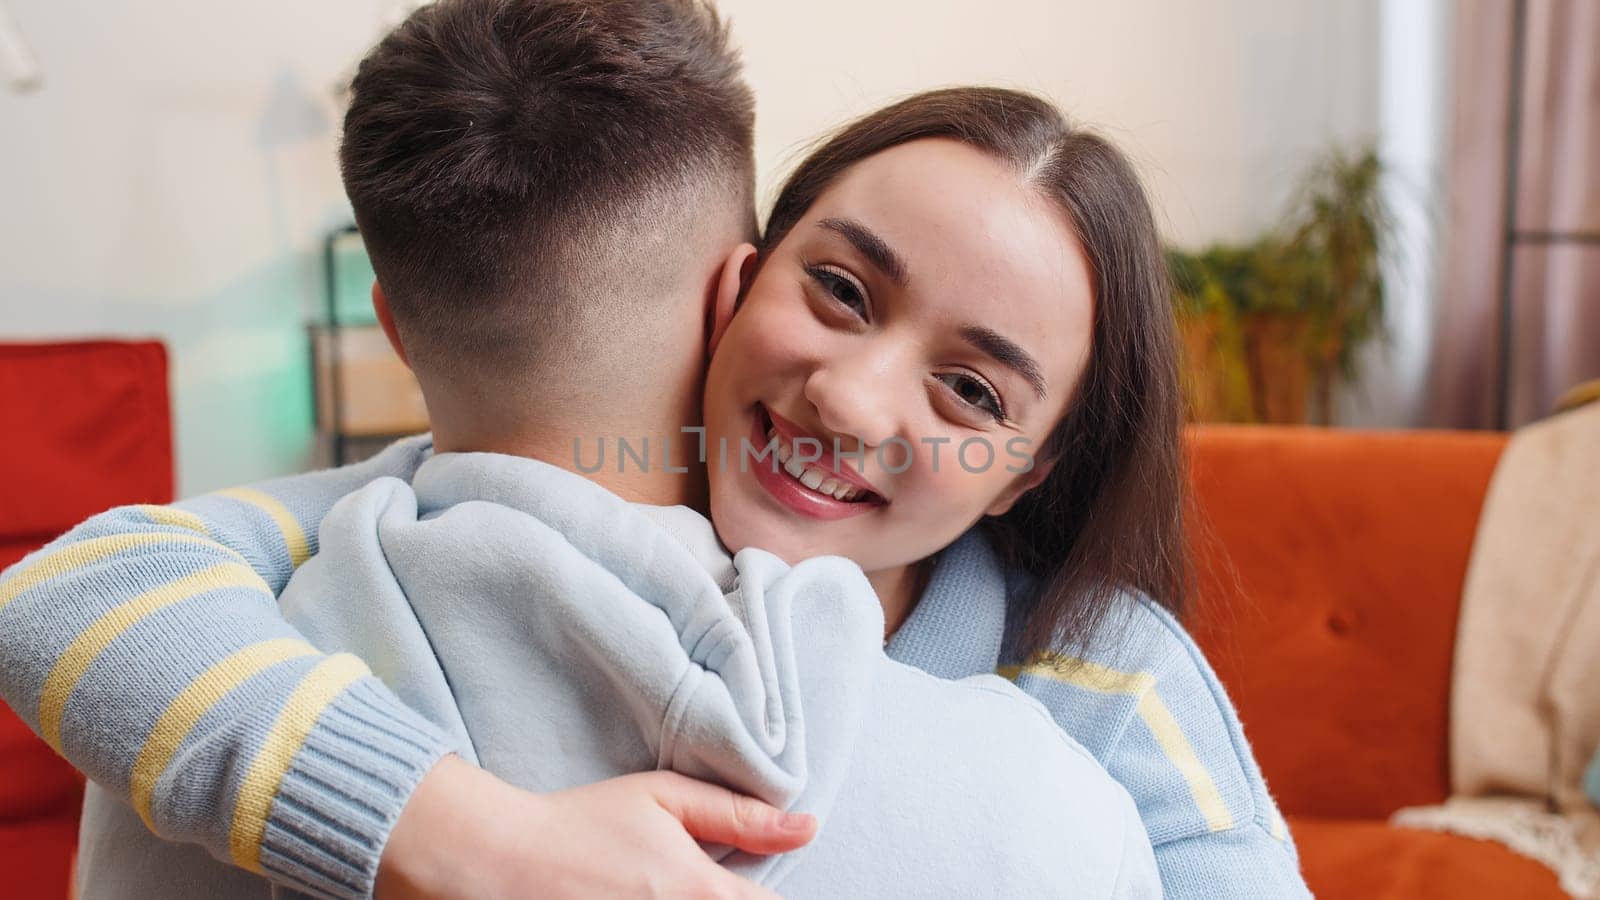 Portrait of woman embracing, hugging man, looking at camera over his shoulder at home. Young authentic lovely family marriage couple. Partnership, trust and support. Husband and wife together in room